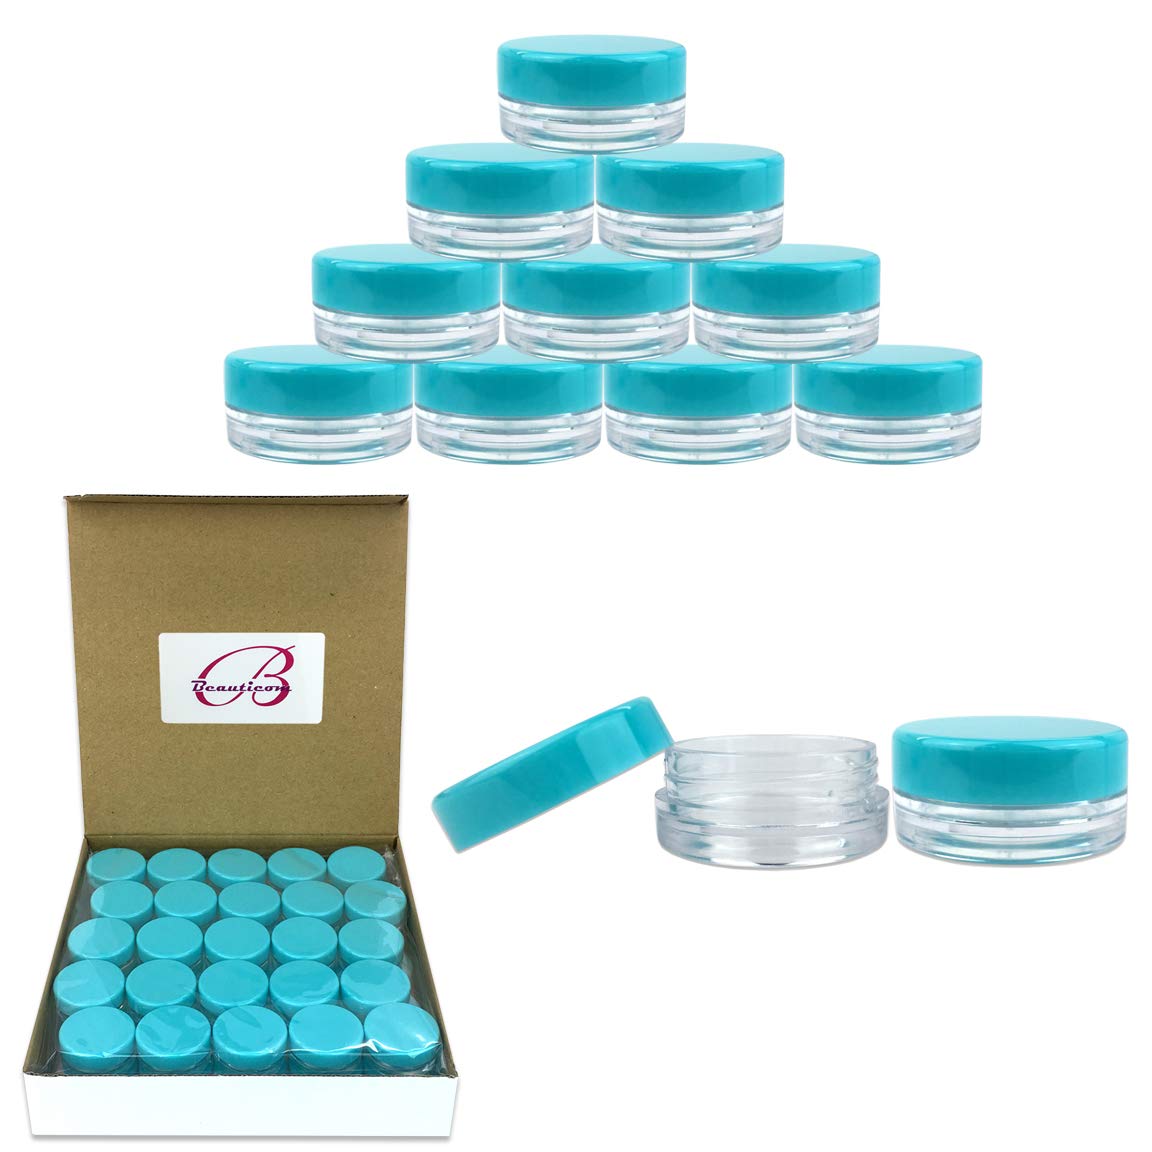 Beauticom 3g/3ml (0.1 Fl Oz) Round Clear Plastic Jars with Round Top Lids for Creams, Lotions, Make Up, Powders, Glitters, and more... (Color: Teal Lid Quantity: 50 Pieces)